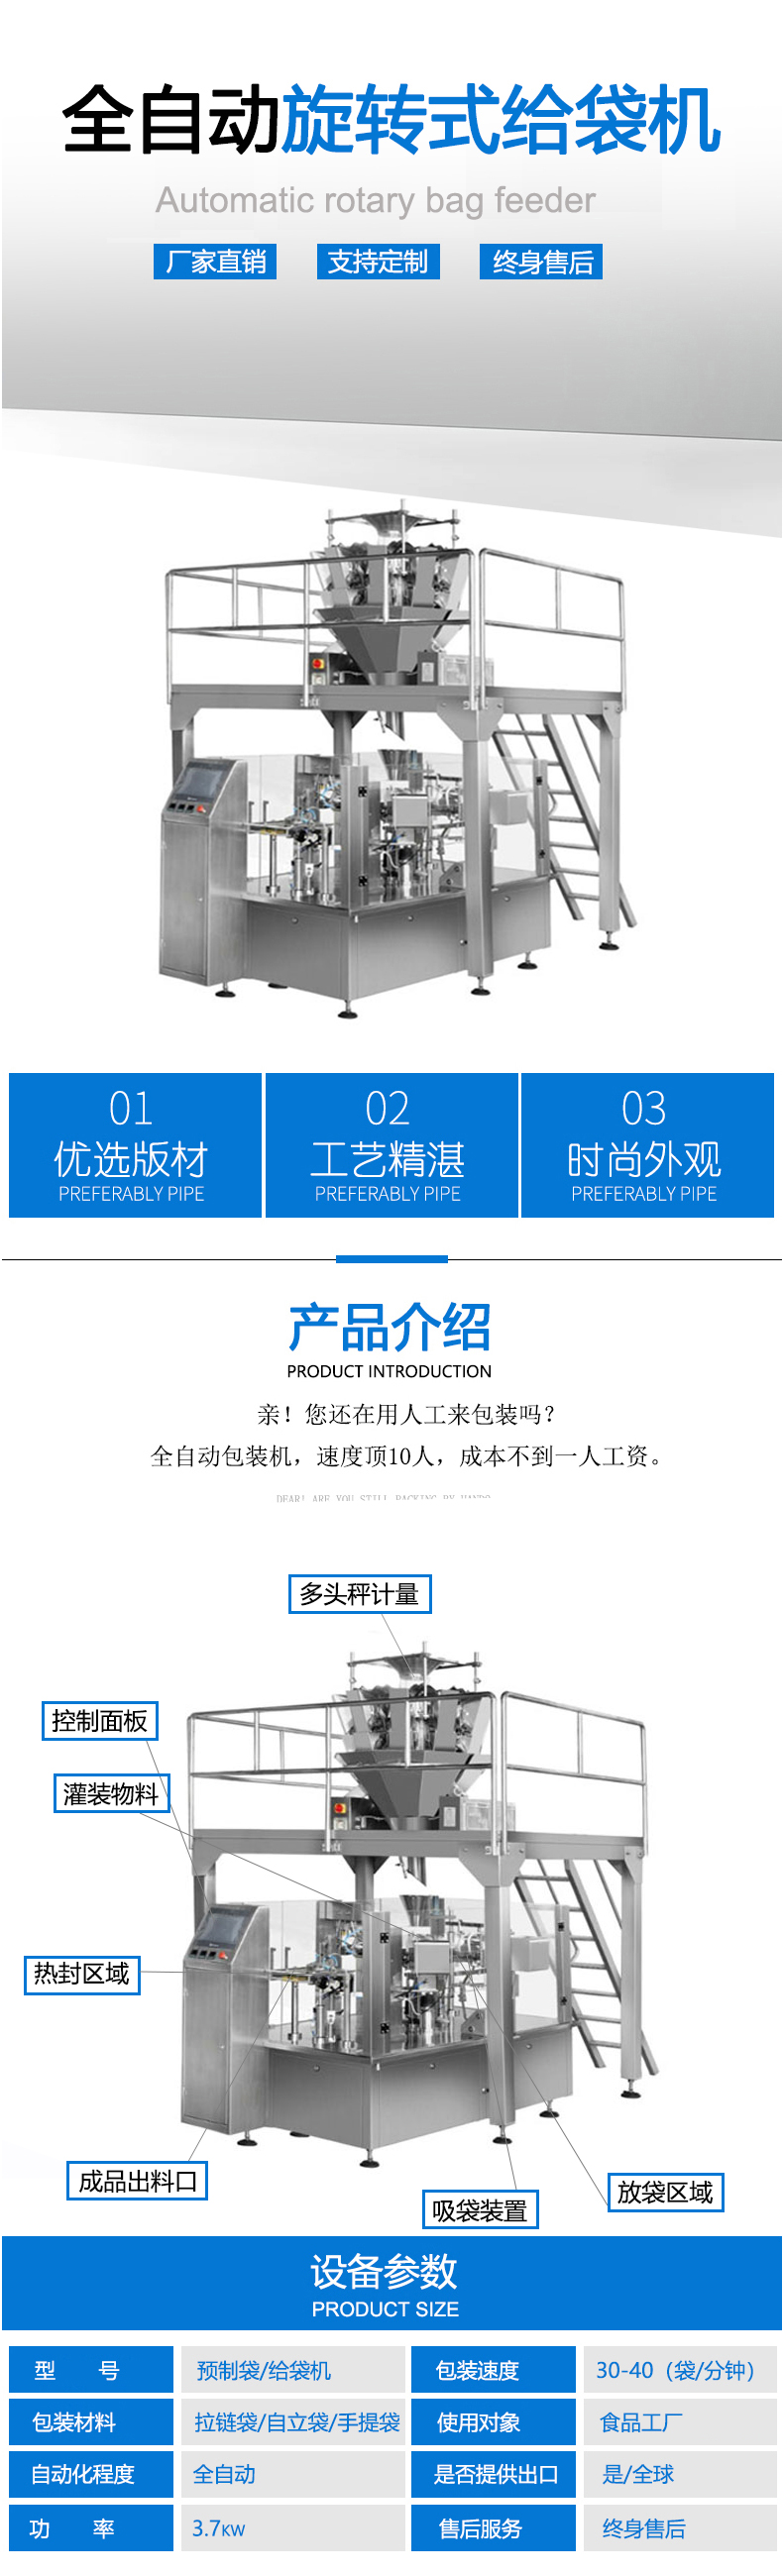 Fully automatic weighing and packaging machine for granular foods such as millet, mung beans, and rice, micro combination weighing and packaging integrated machine